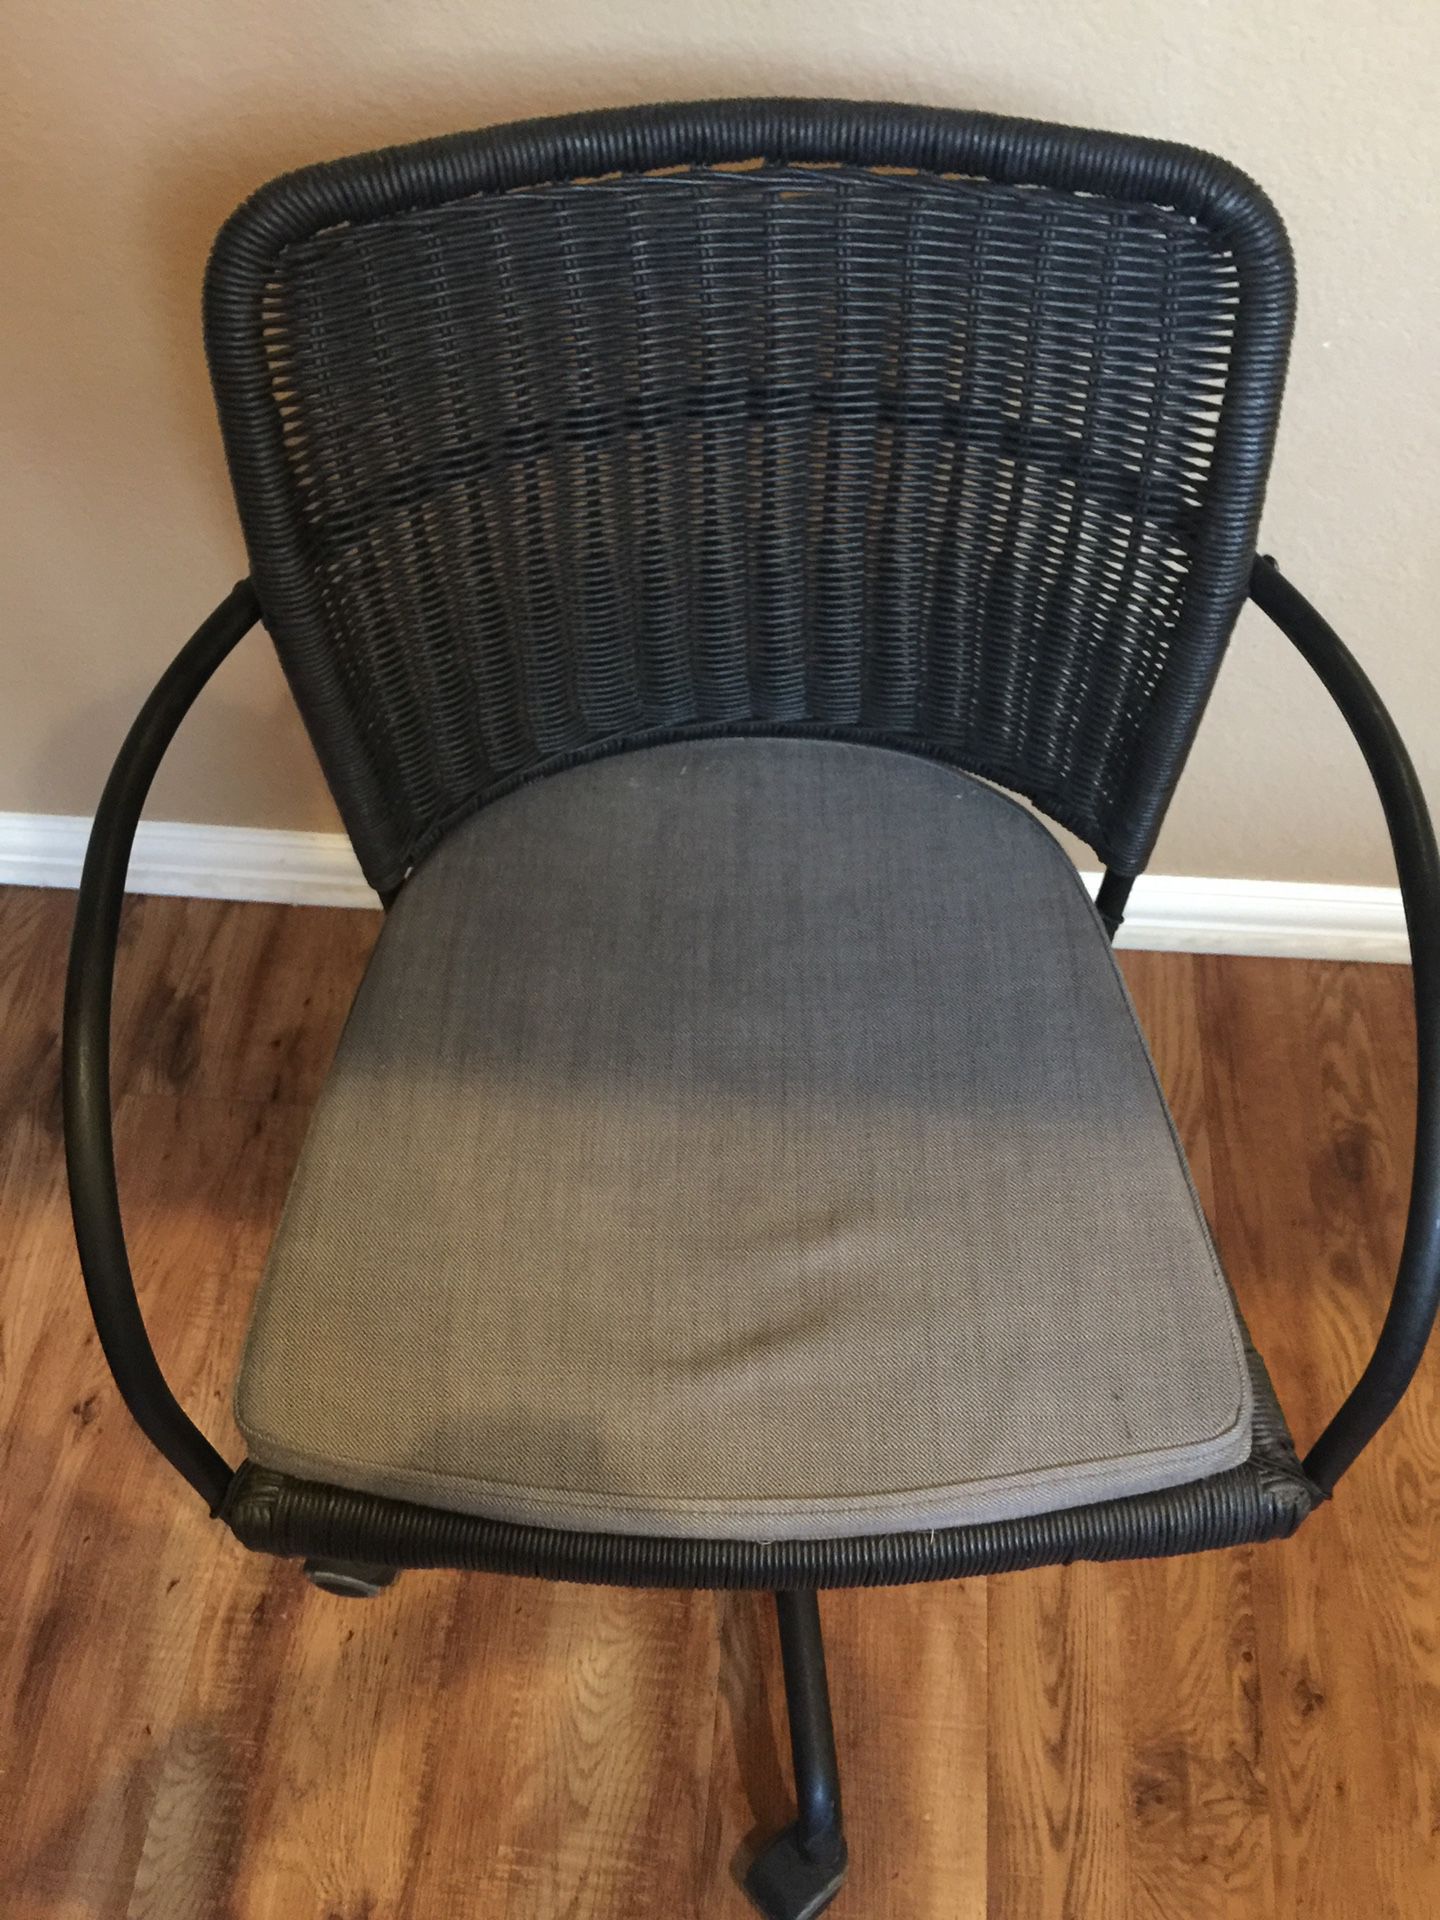 FREE Office Chair. Ad Up It’s Available 